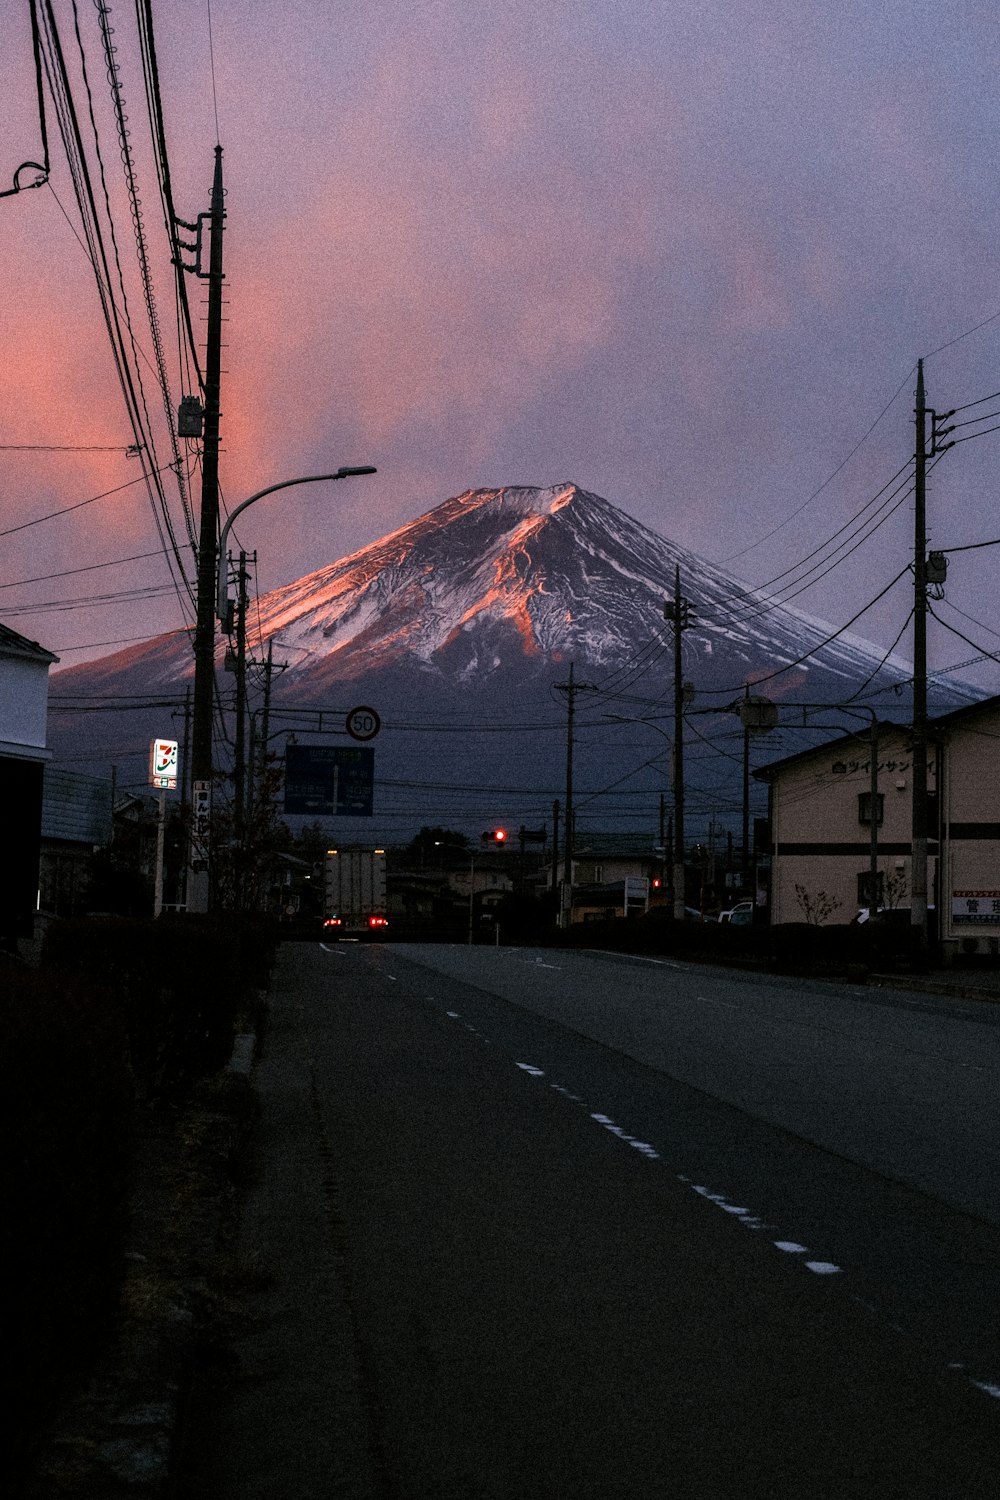 a view of a snow covered mountain at dusk